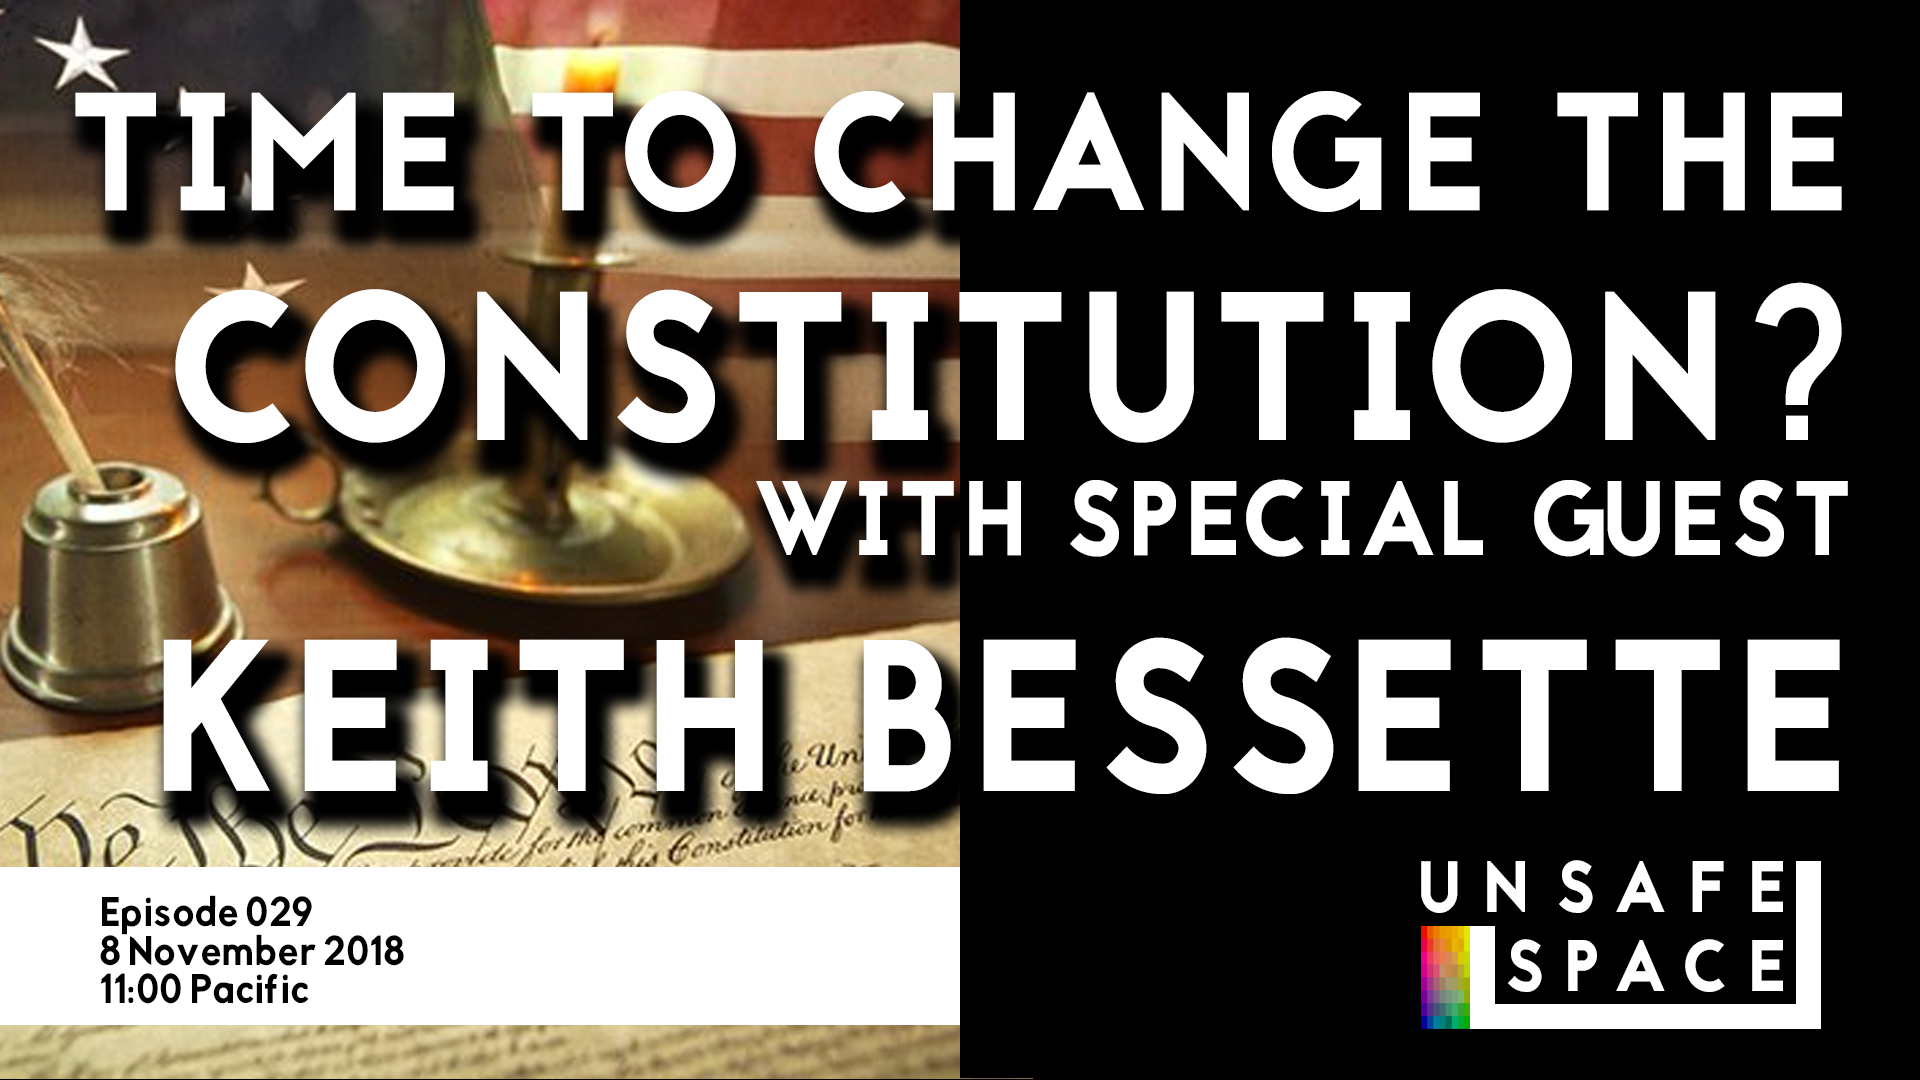 [Live: Episode 029] Time to Change the Constitution?